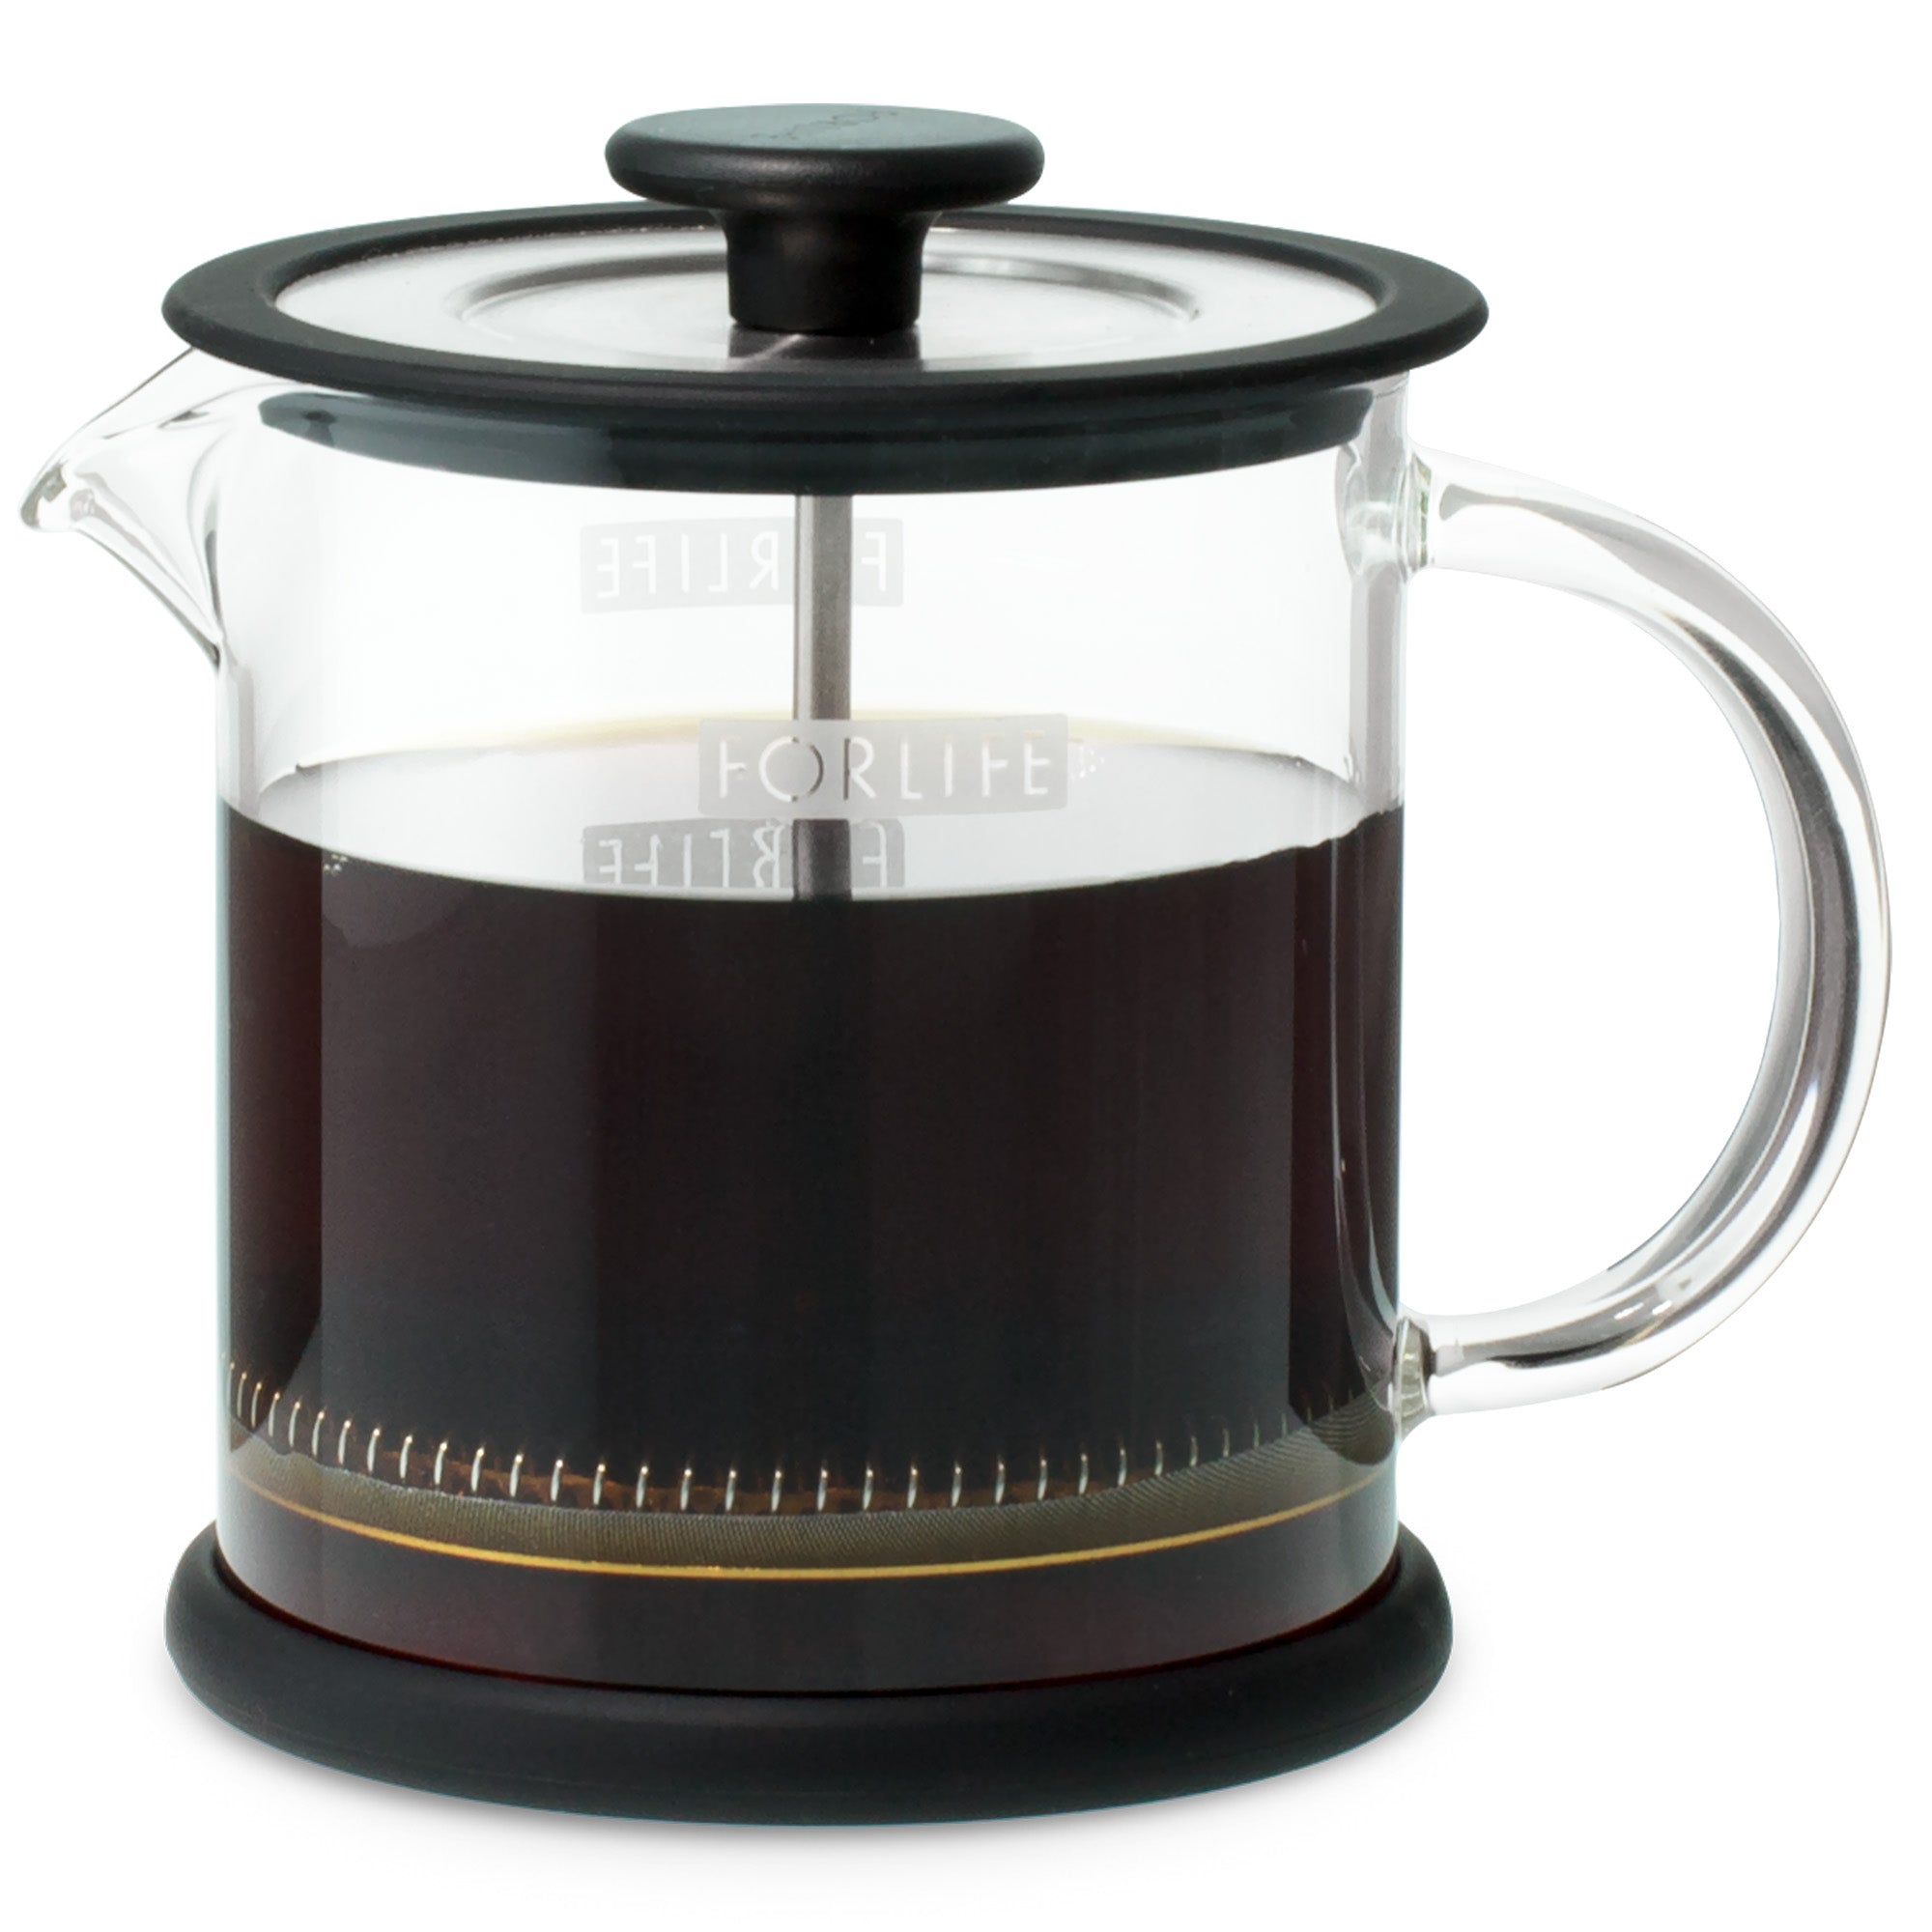 ForLife - Cafe Style Glass Coffee / Tea Press 16 oz. — Tea Zaanti, Promoting Peace One Cup At A Time